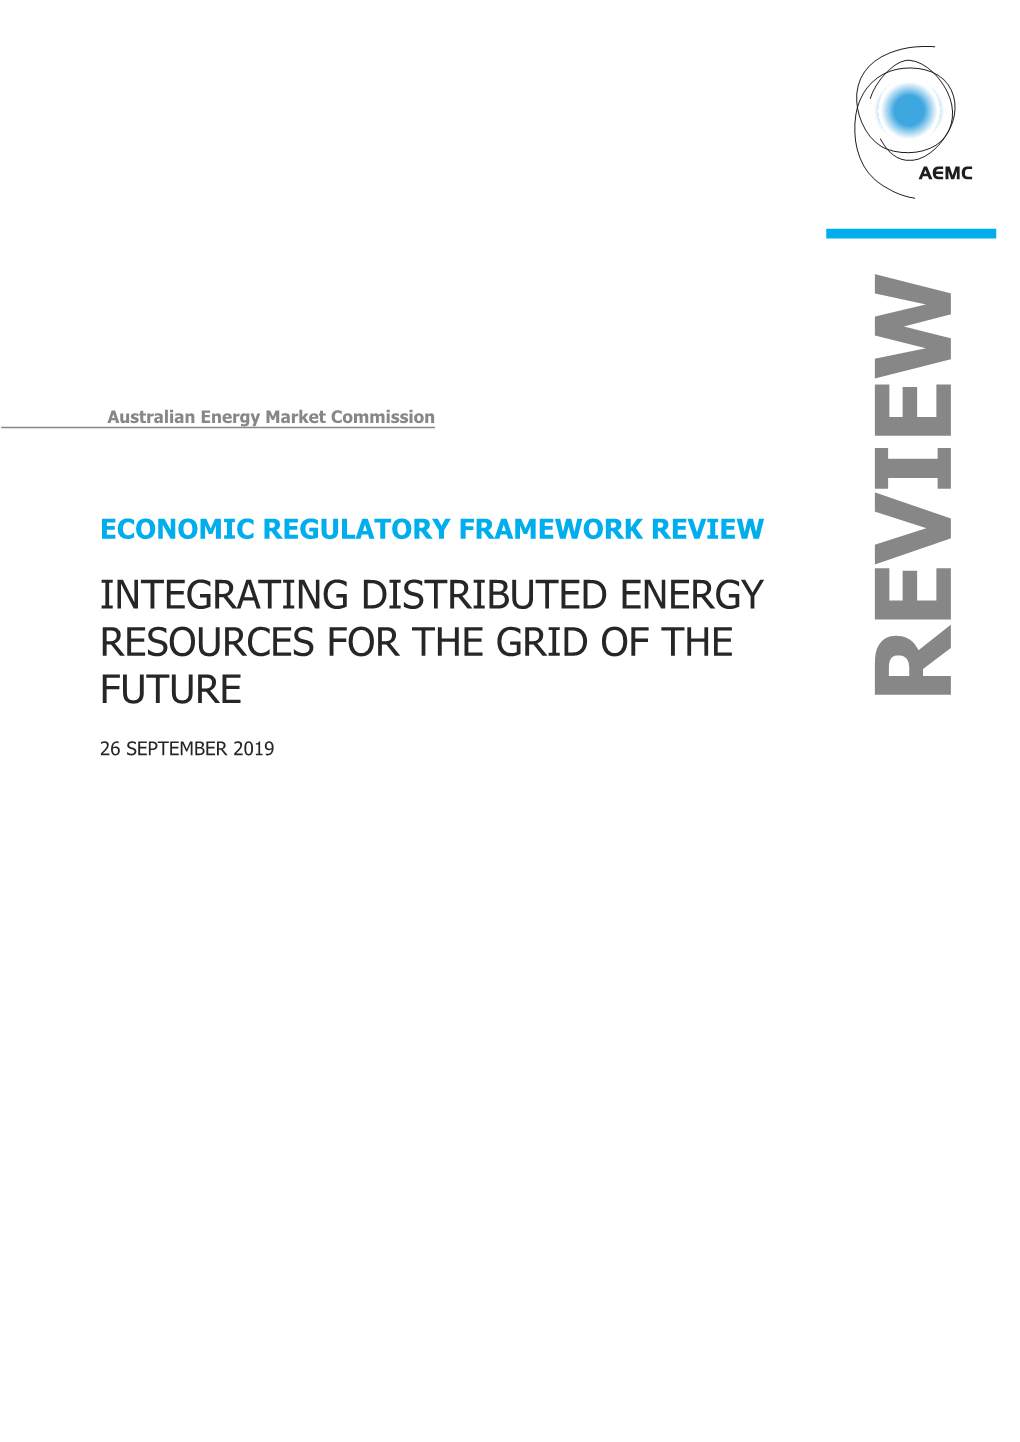 Economic Regulatory Framework Review Integrating Distributed Energy Resources for the Grid of The